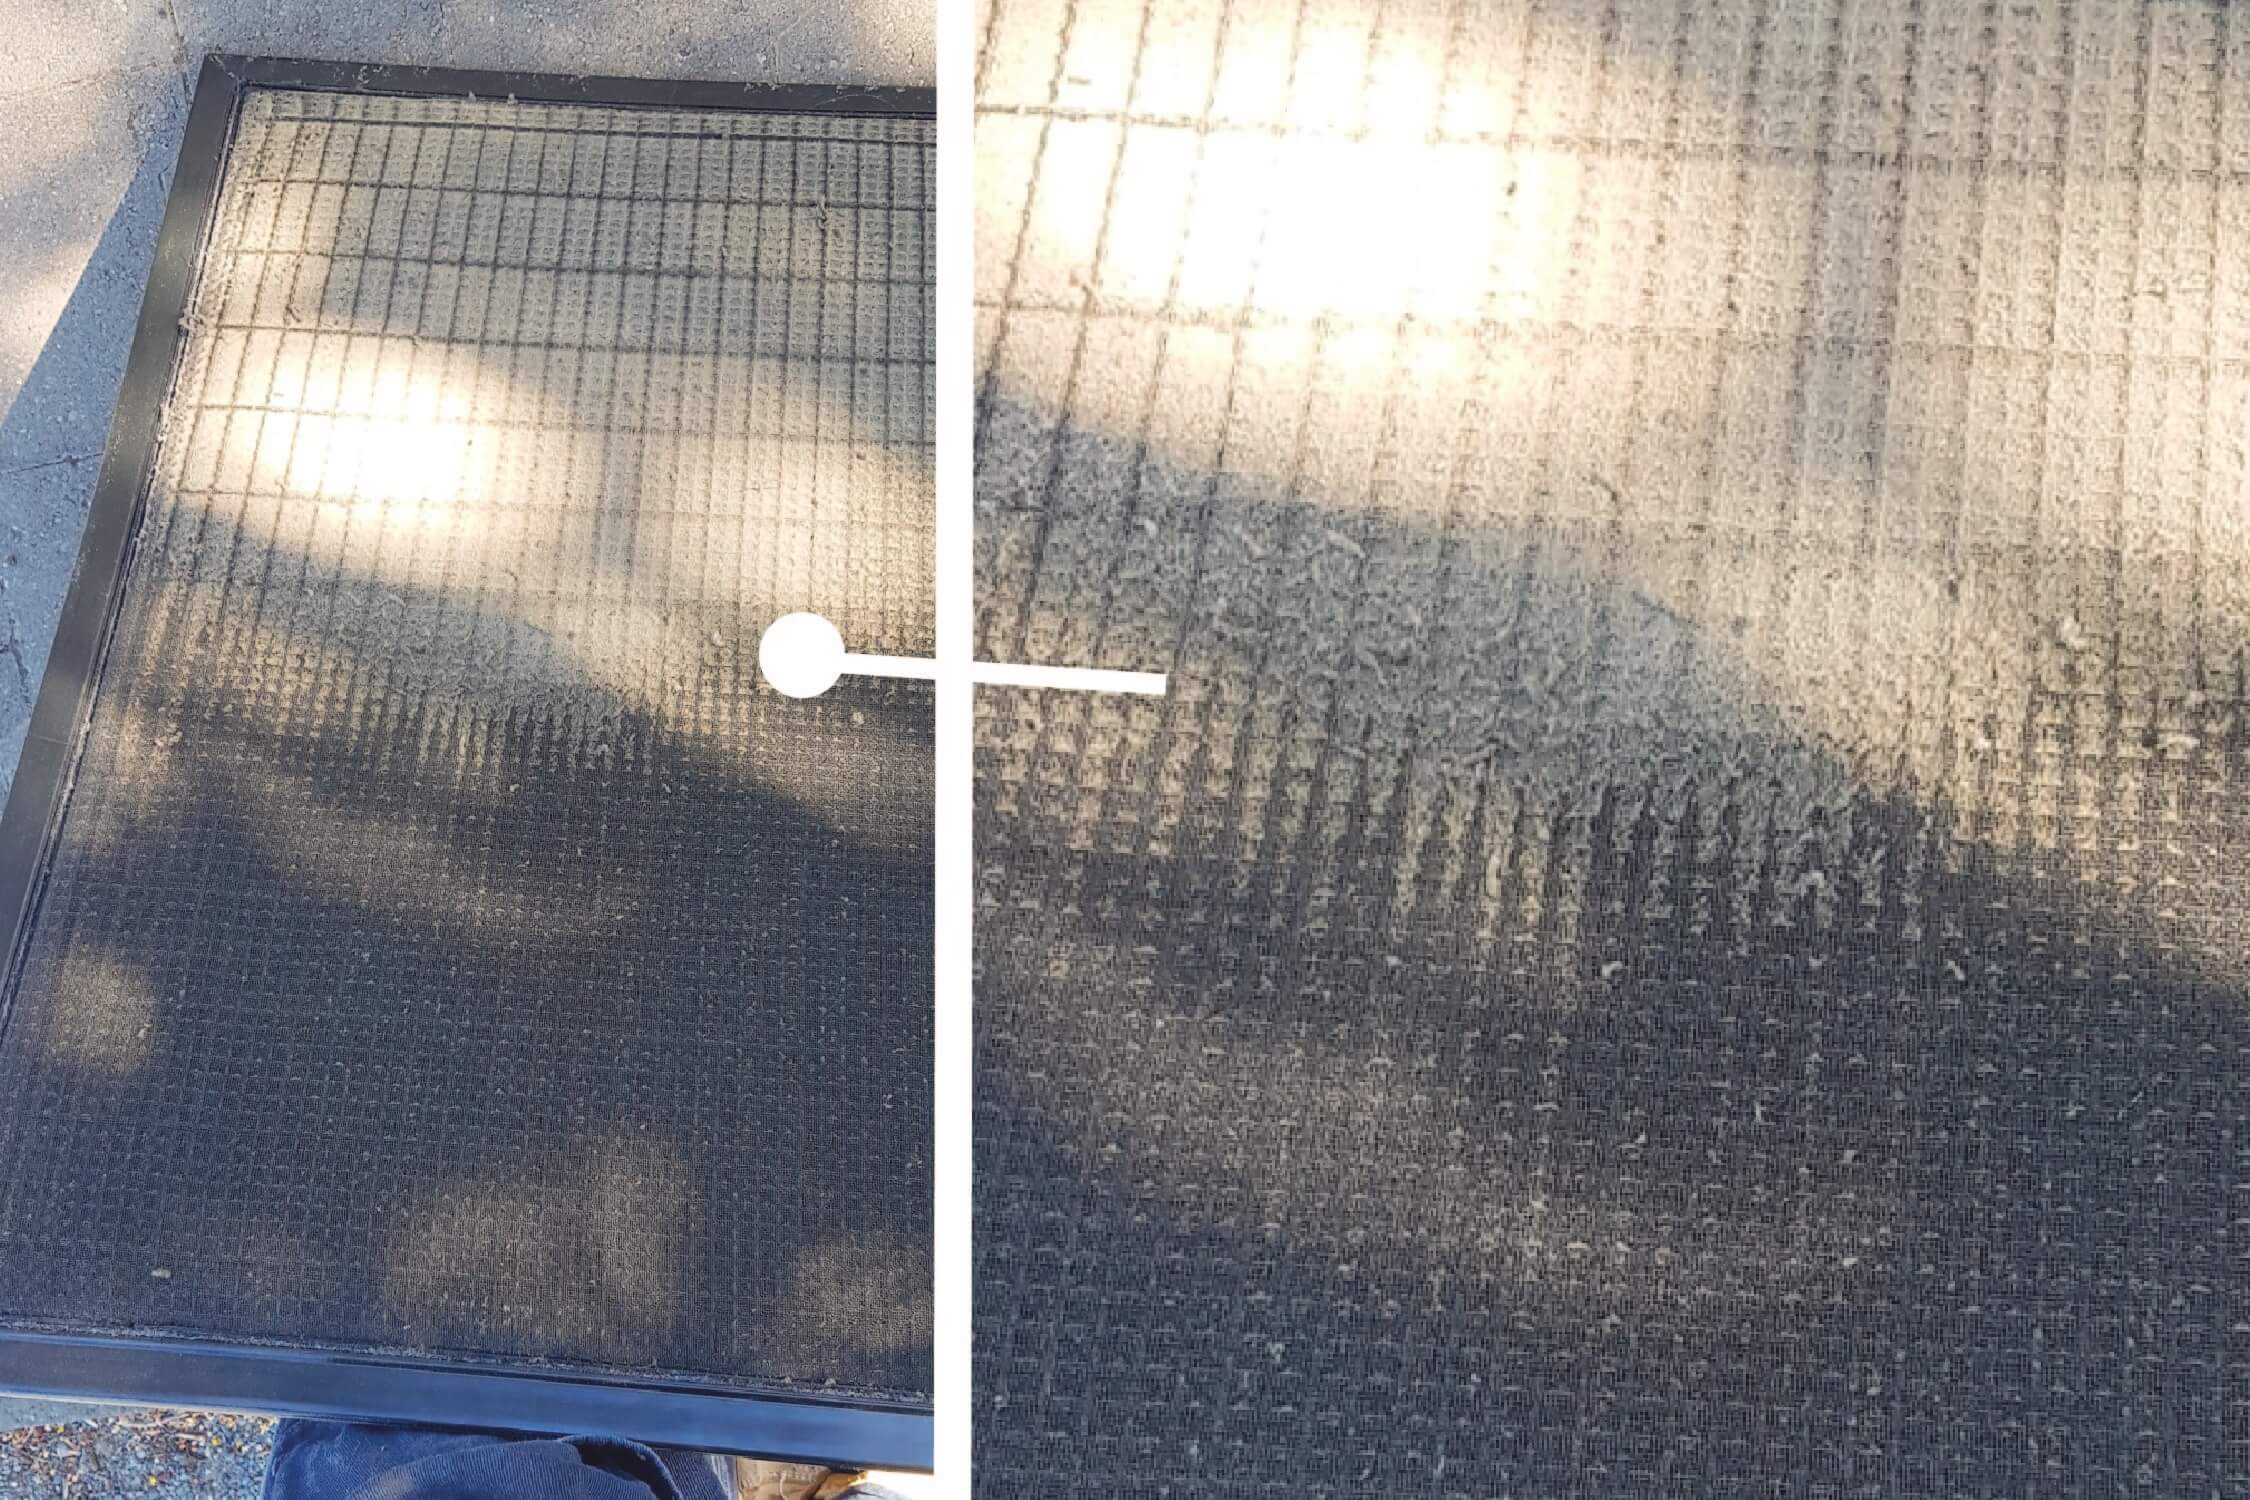 Dig up the dirt on aircon filters